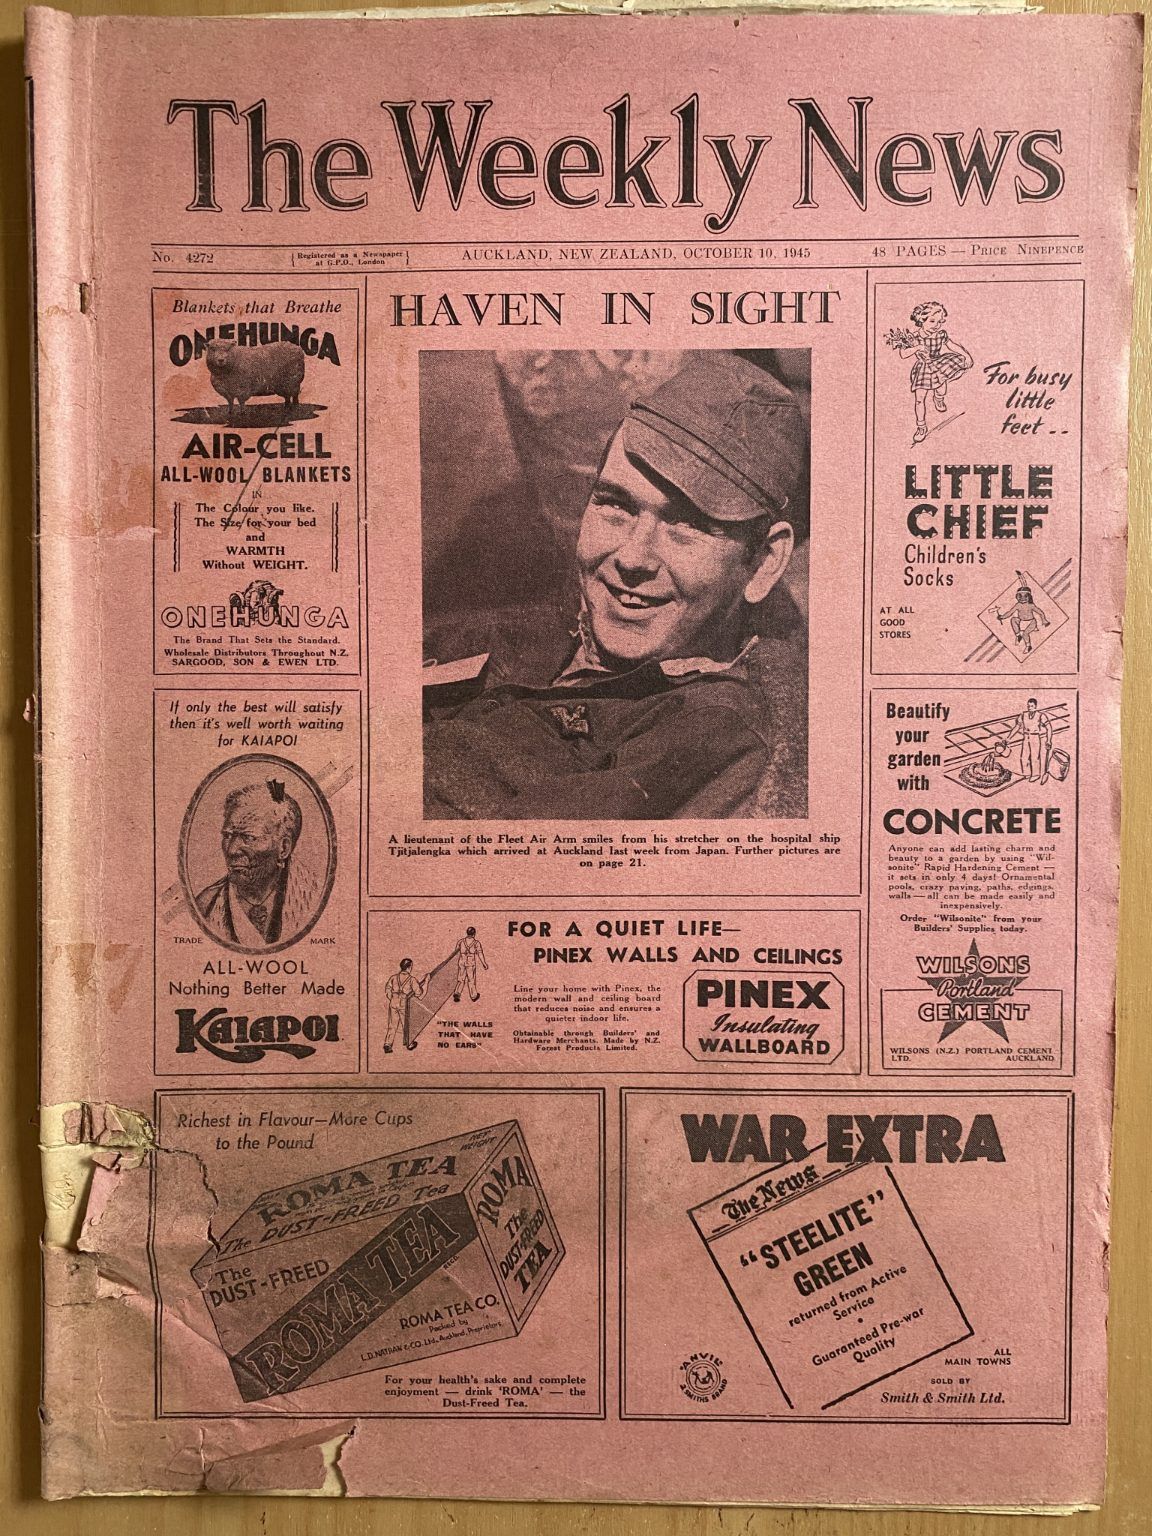 OLD NEWSPAPER: The Weekly News - No. 4272, 10 October 1945